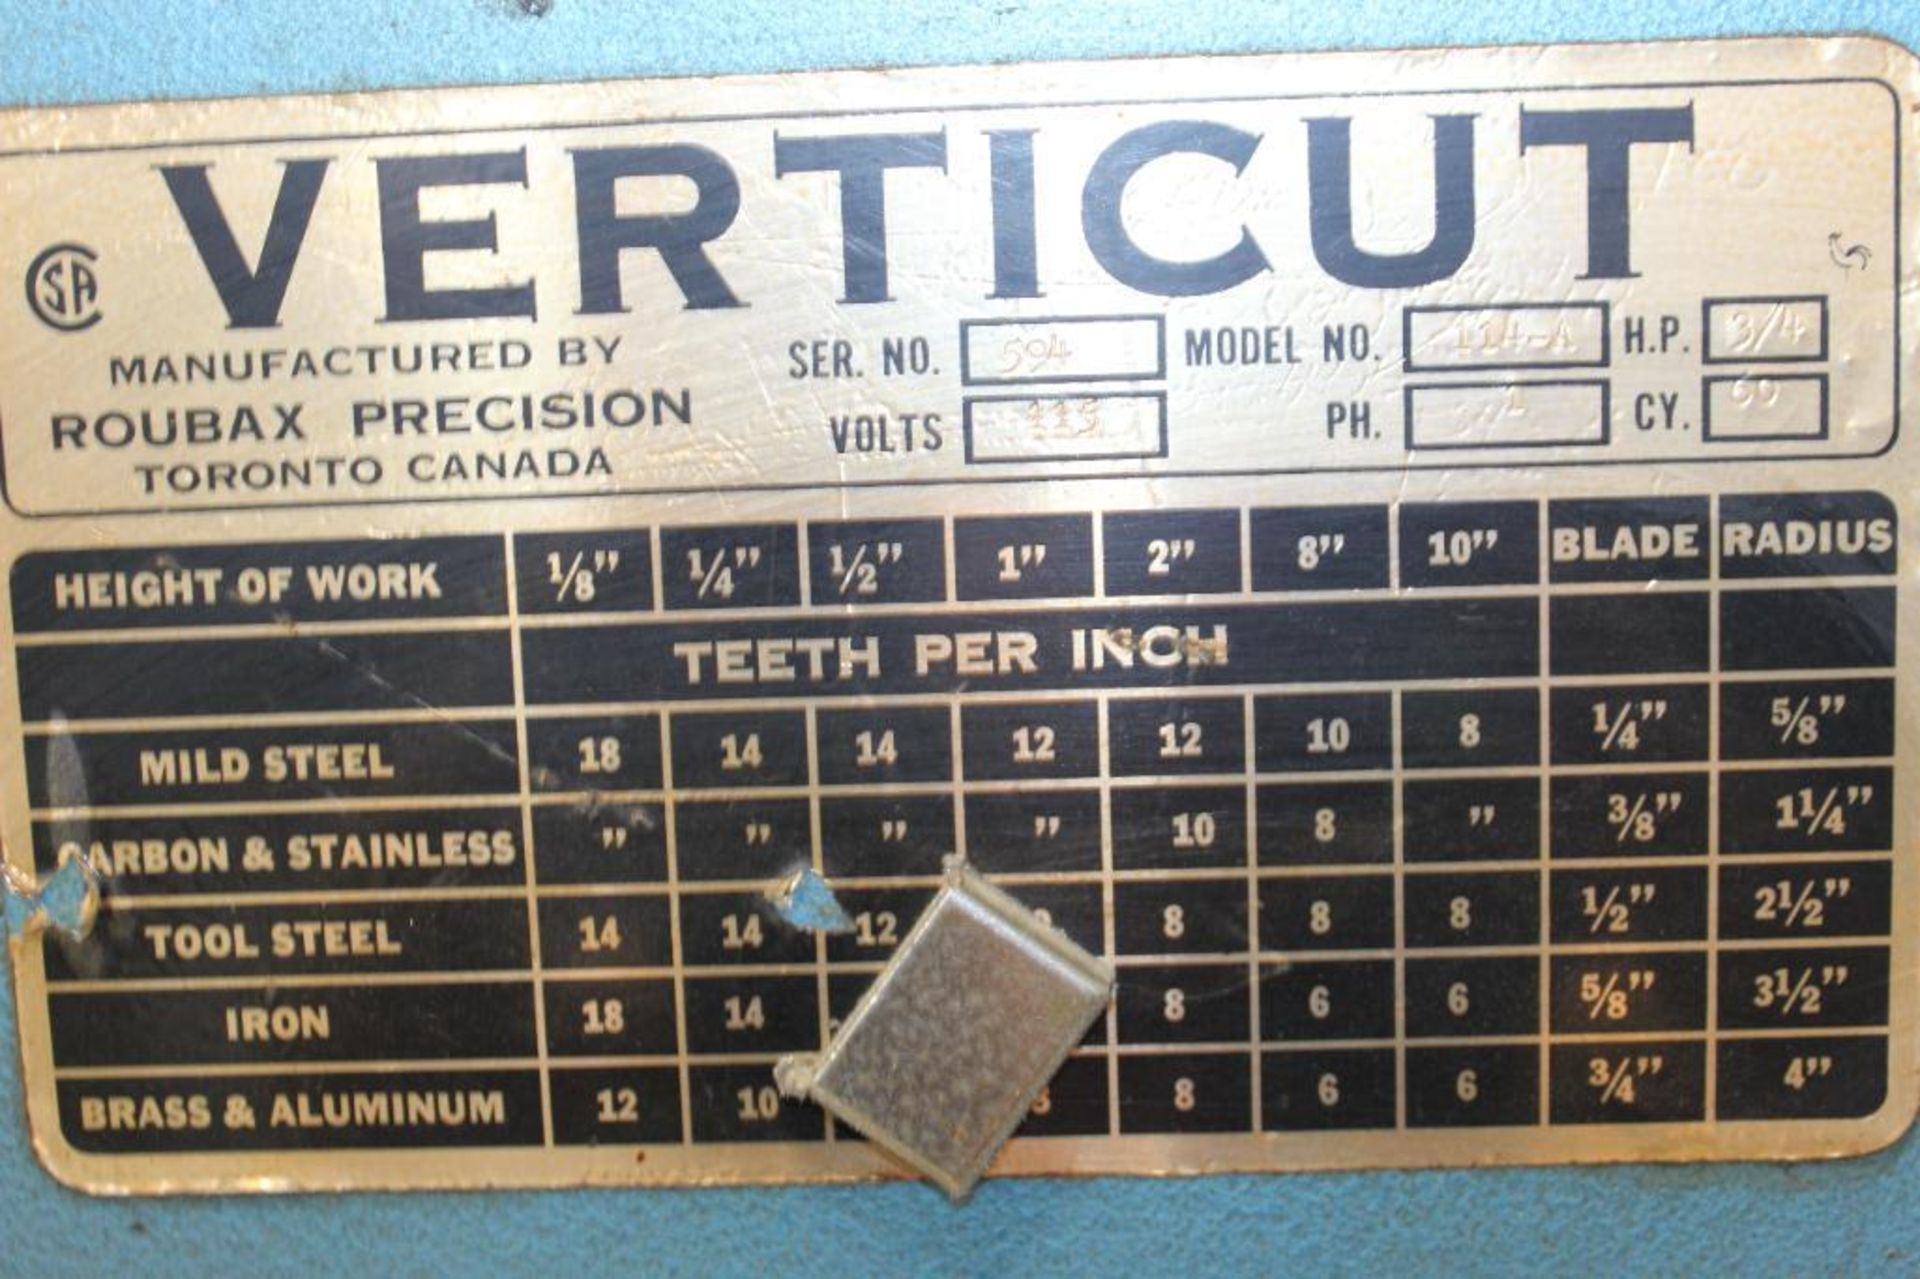 Verticut Model 114-A Vertical Band Saw on rolling base - Image 6 of 6